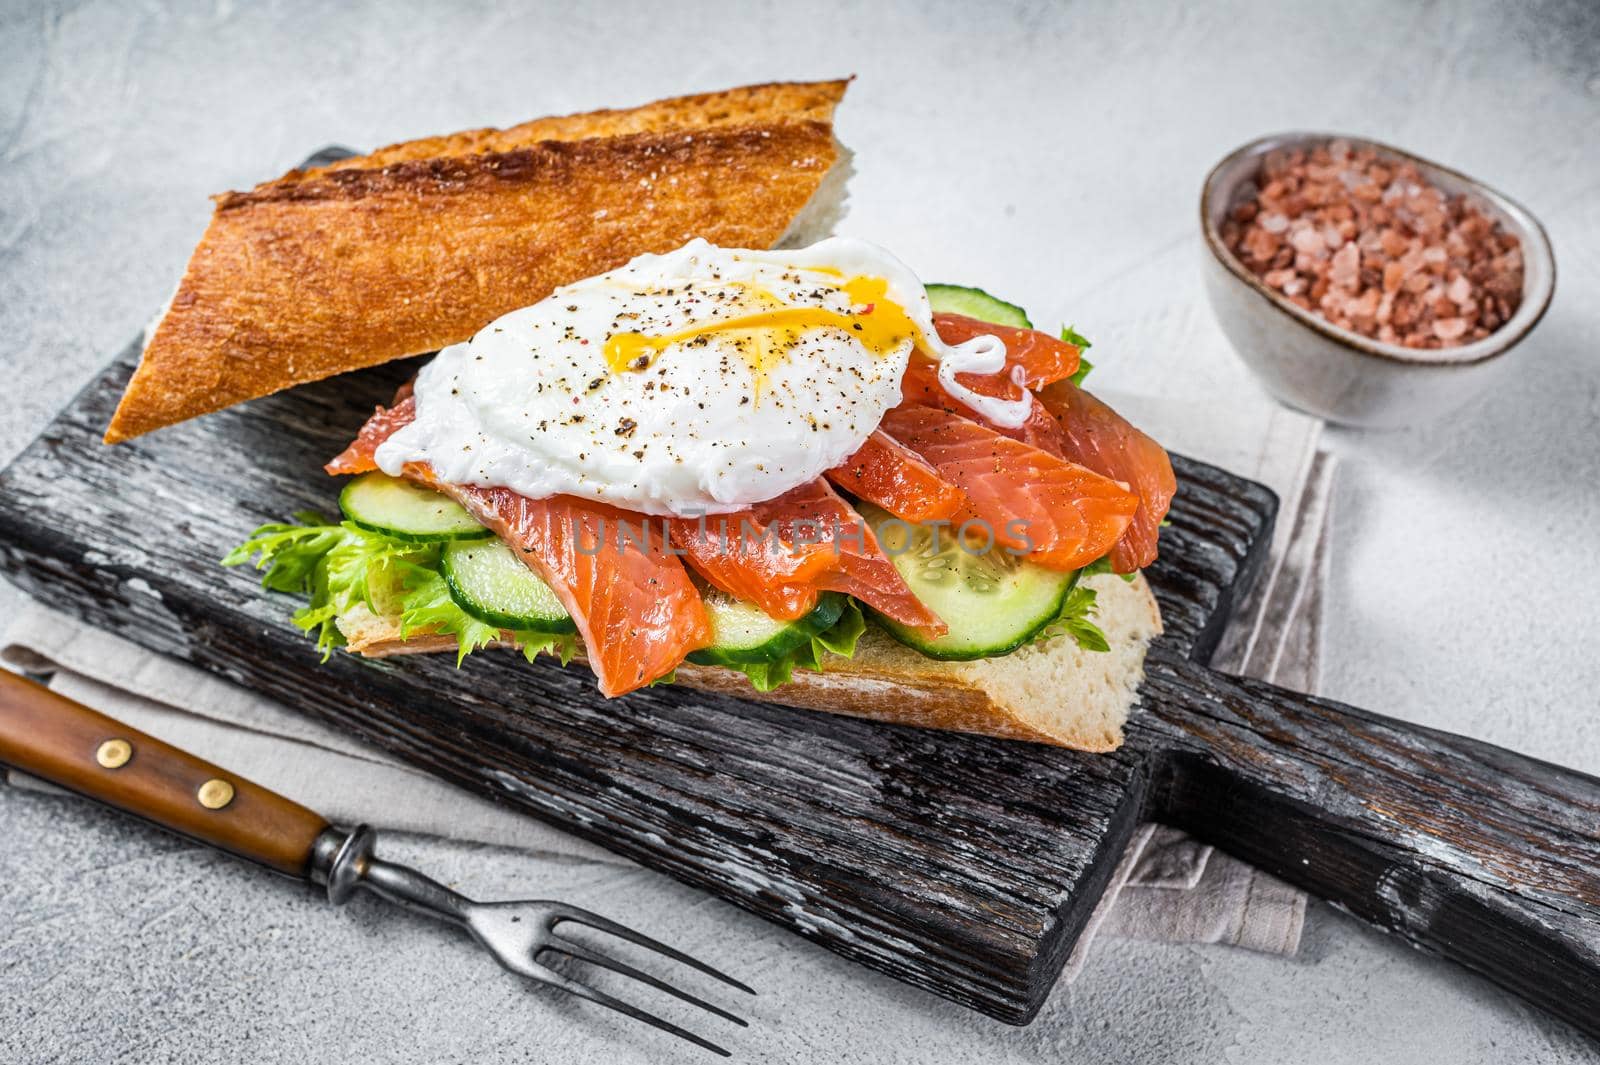 Sandwich with Poached egg, smoked salmon and avocado on toast. White background. Top view.